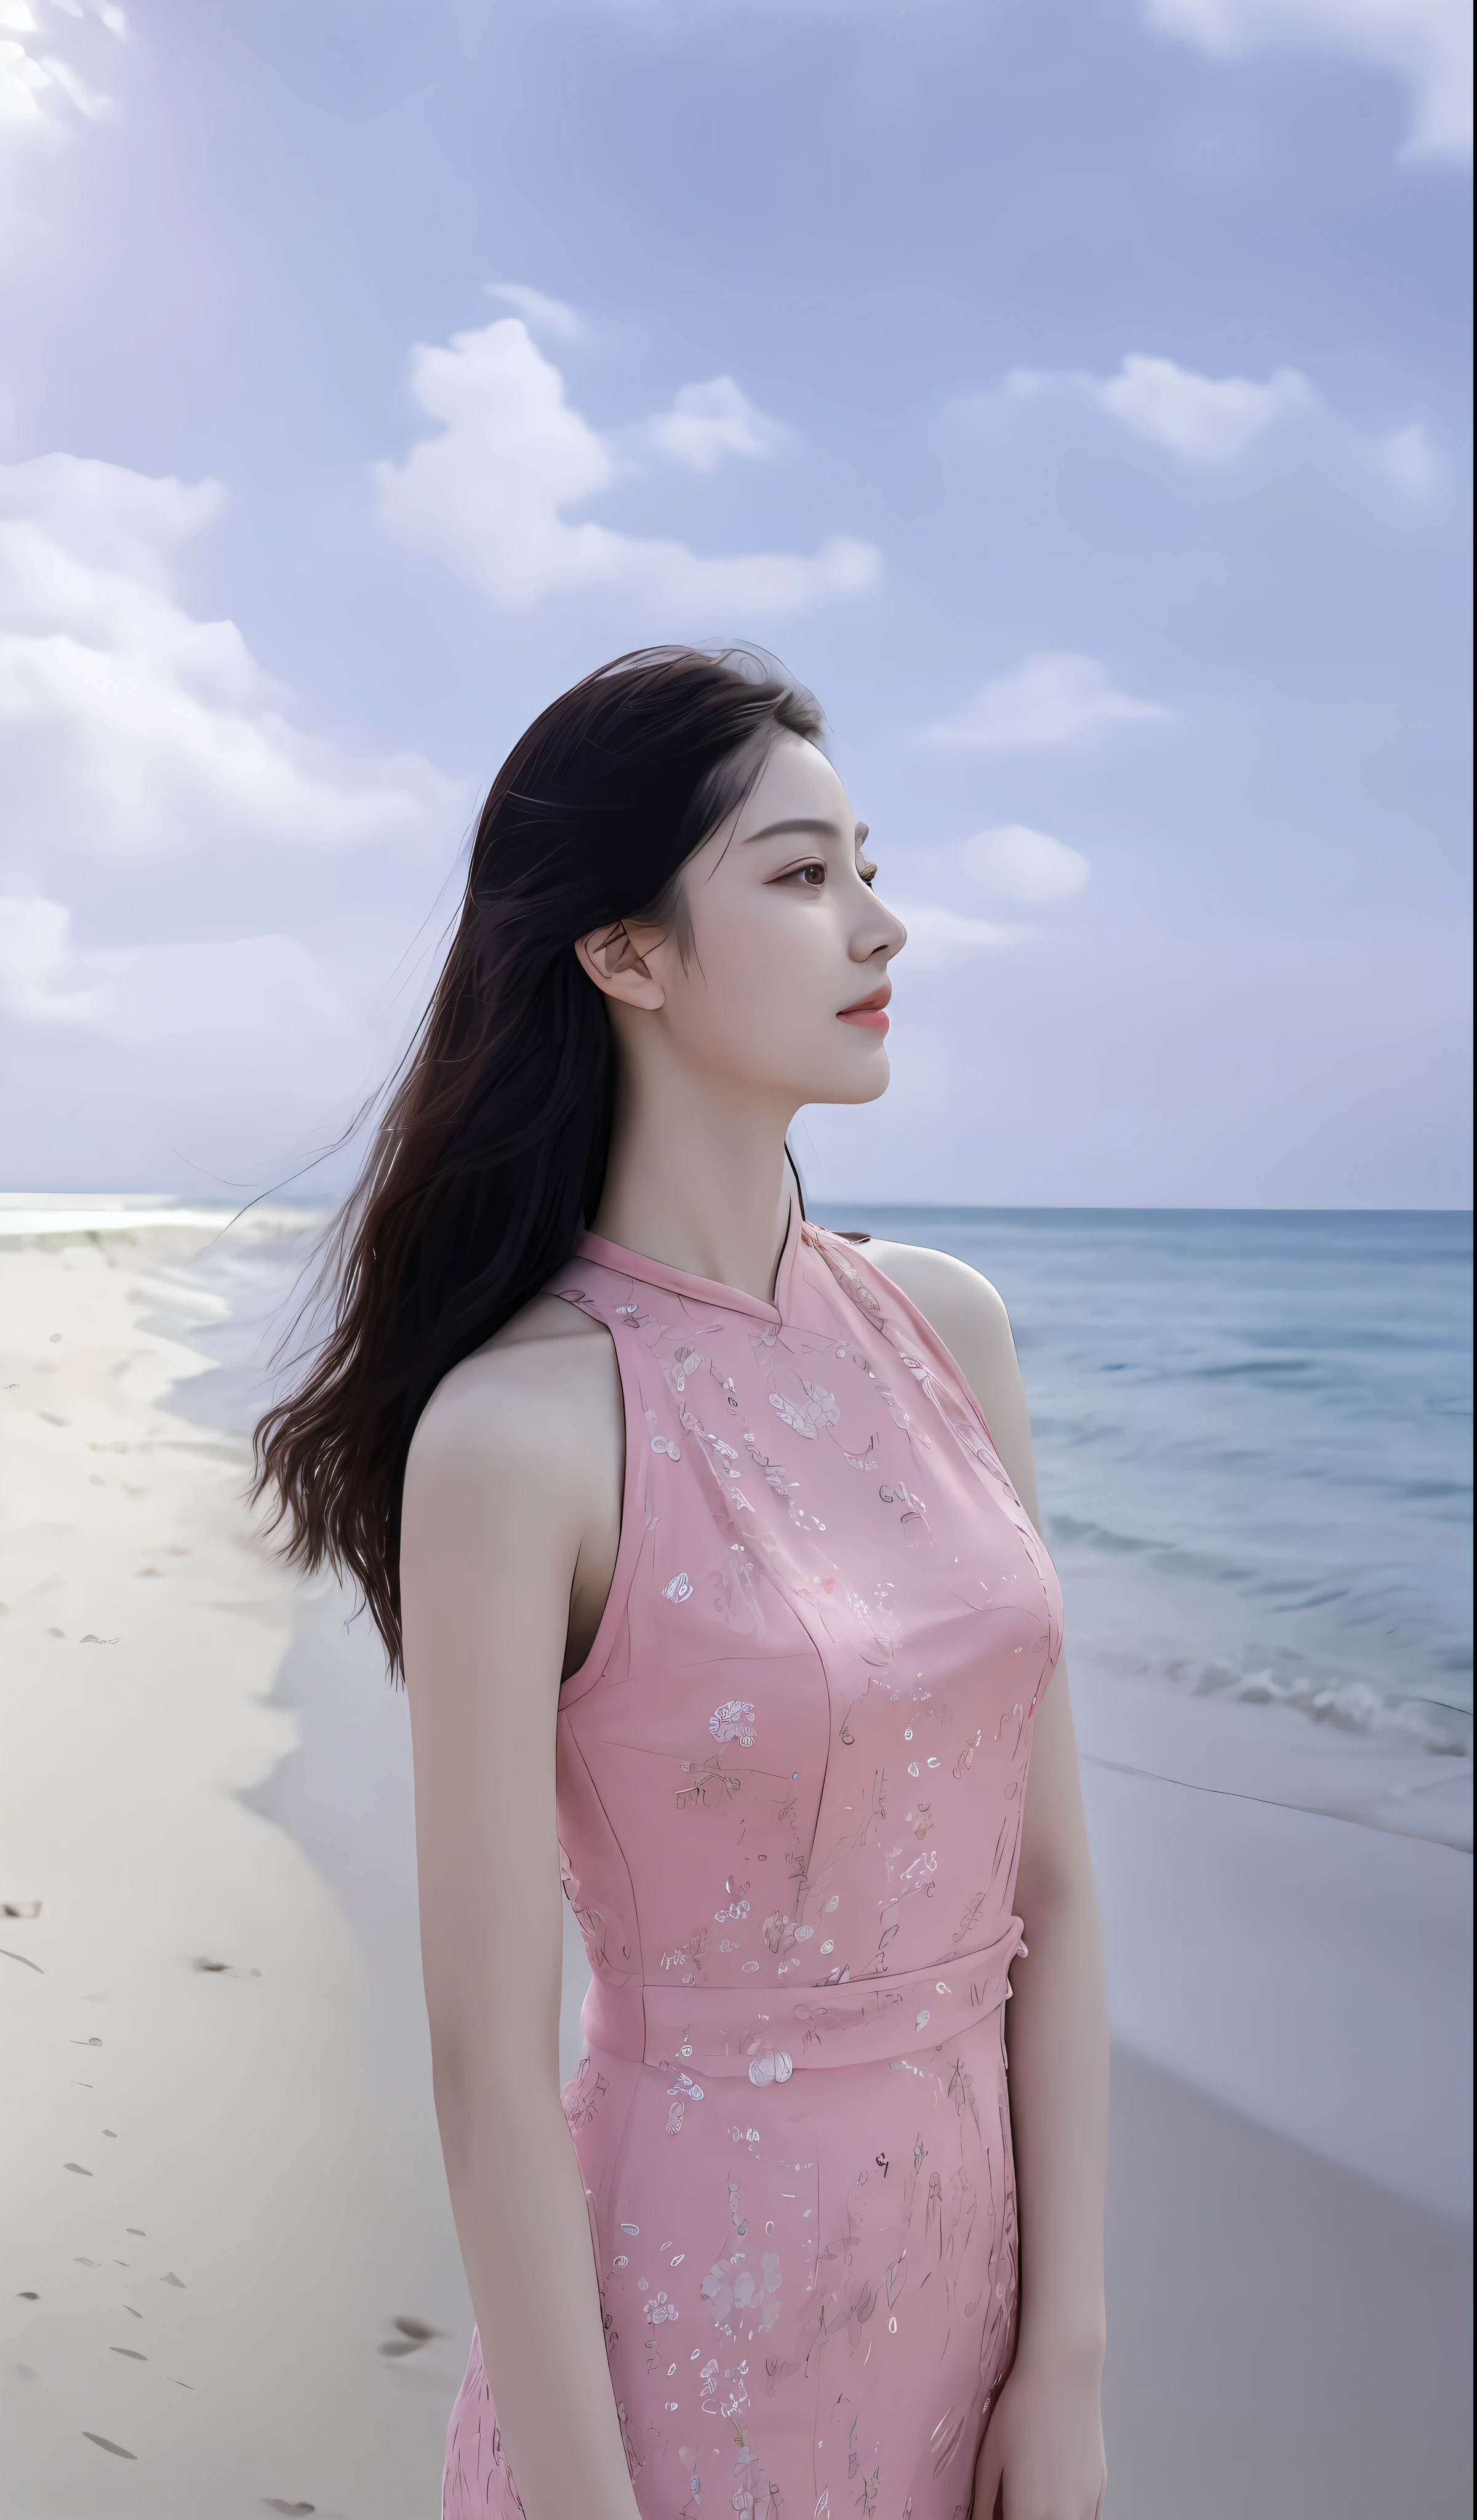 (Masterpiece), (Best Quality), (detailed), 1 girl, 22 years old, playful expression, big breasts, long hair, beautiful, natural, exposed, Alafid woman in pink dress standing on the beach, Shaxi, Sea Queen Mu Yanling, Ruan Jia beautiful! , cover photo portrait Du Juan, Li Zixin, inspired by Tang Yifen, Chen Xintong, Ye Wenfei, inspired by Xie Sun, by Mei Qing, inspired by Cheng Jiasui, inspired by Ma Yuanyu